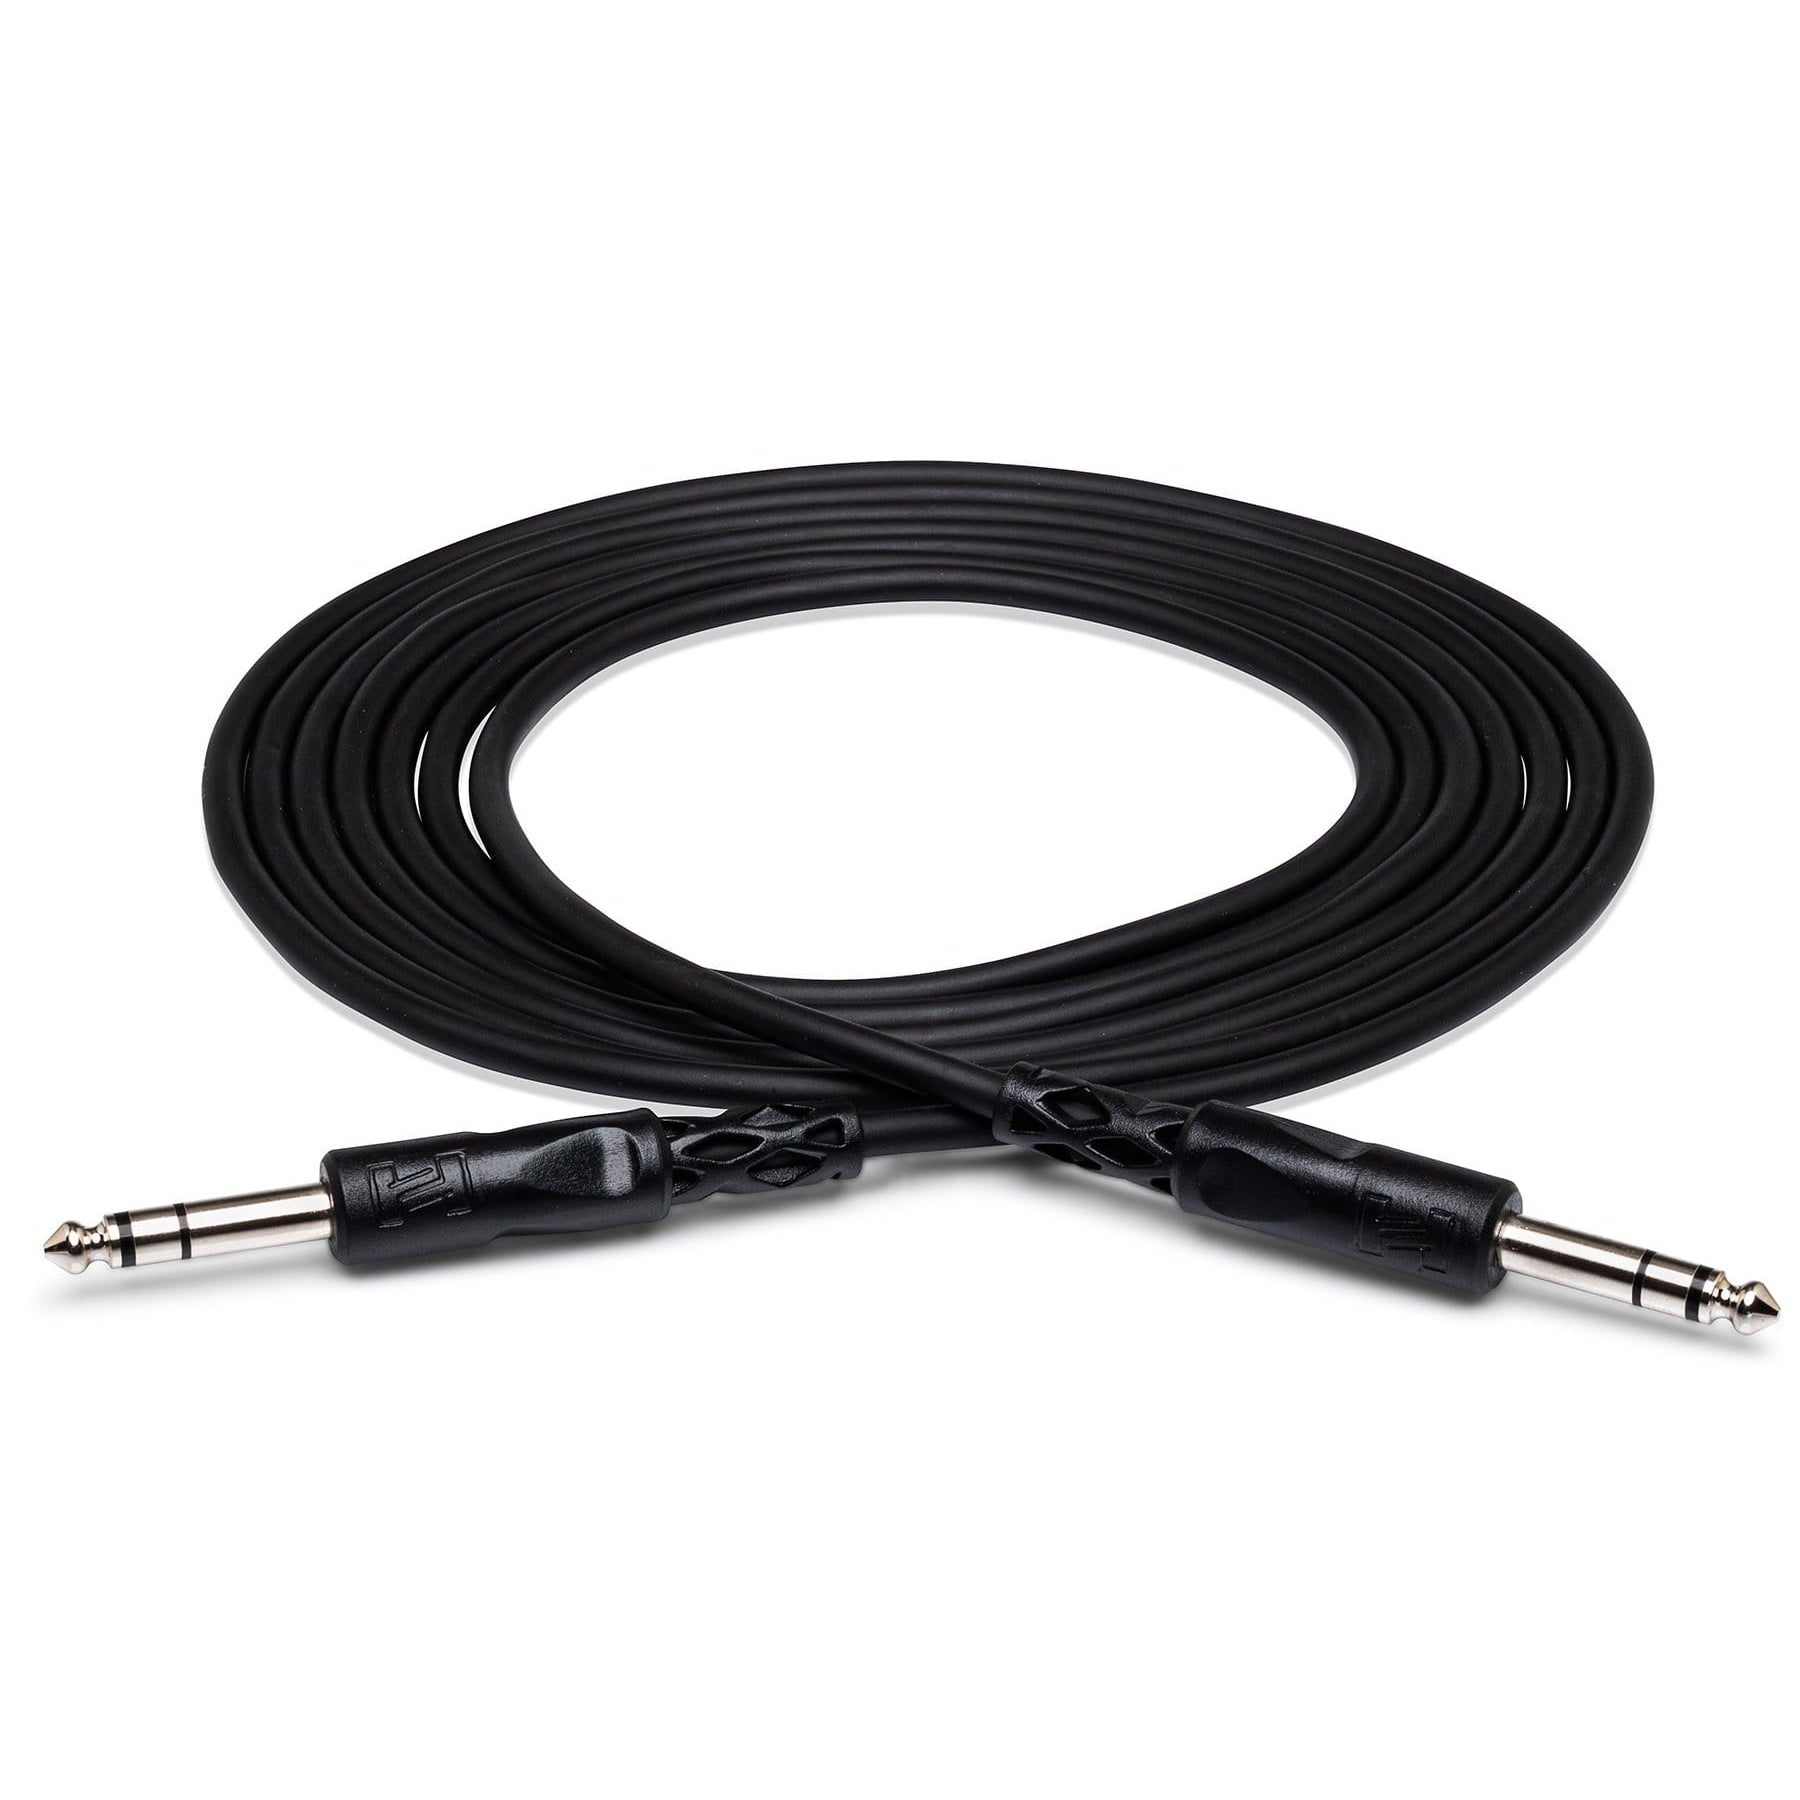 Hosa 1/4" TRS Balanced Cable | CSS110